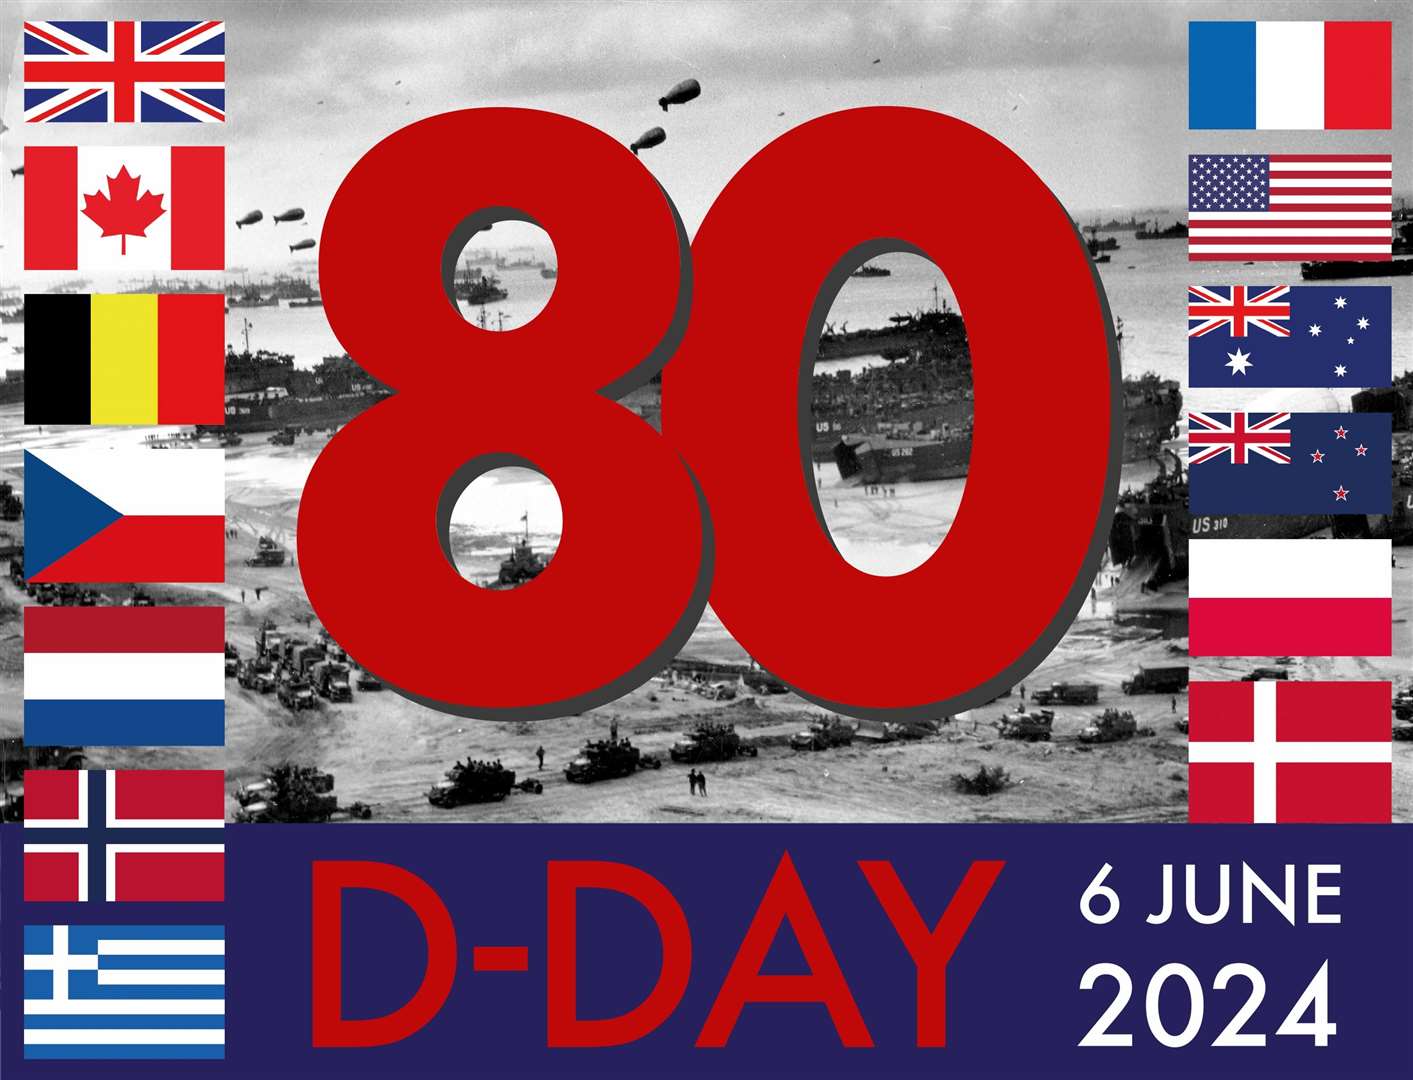 Countries around the world will be remembering D-Day